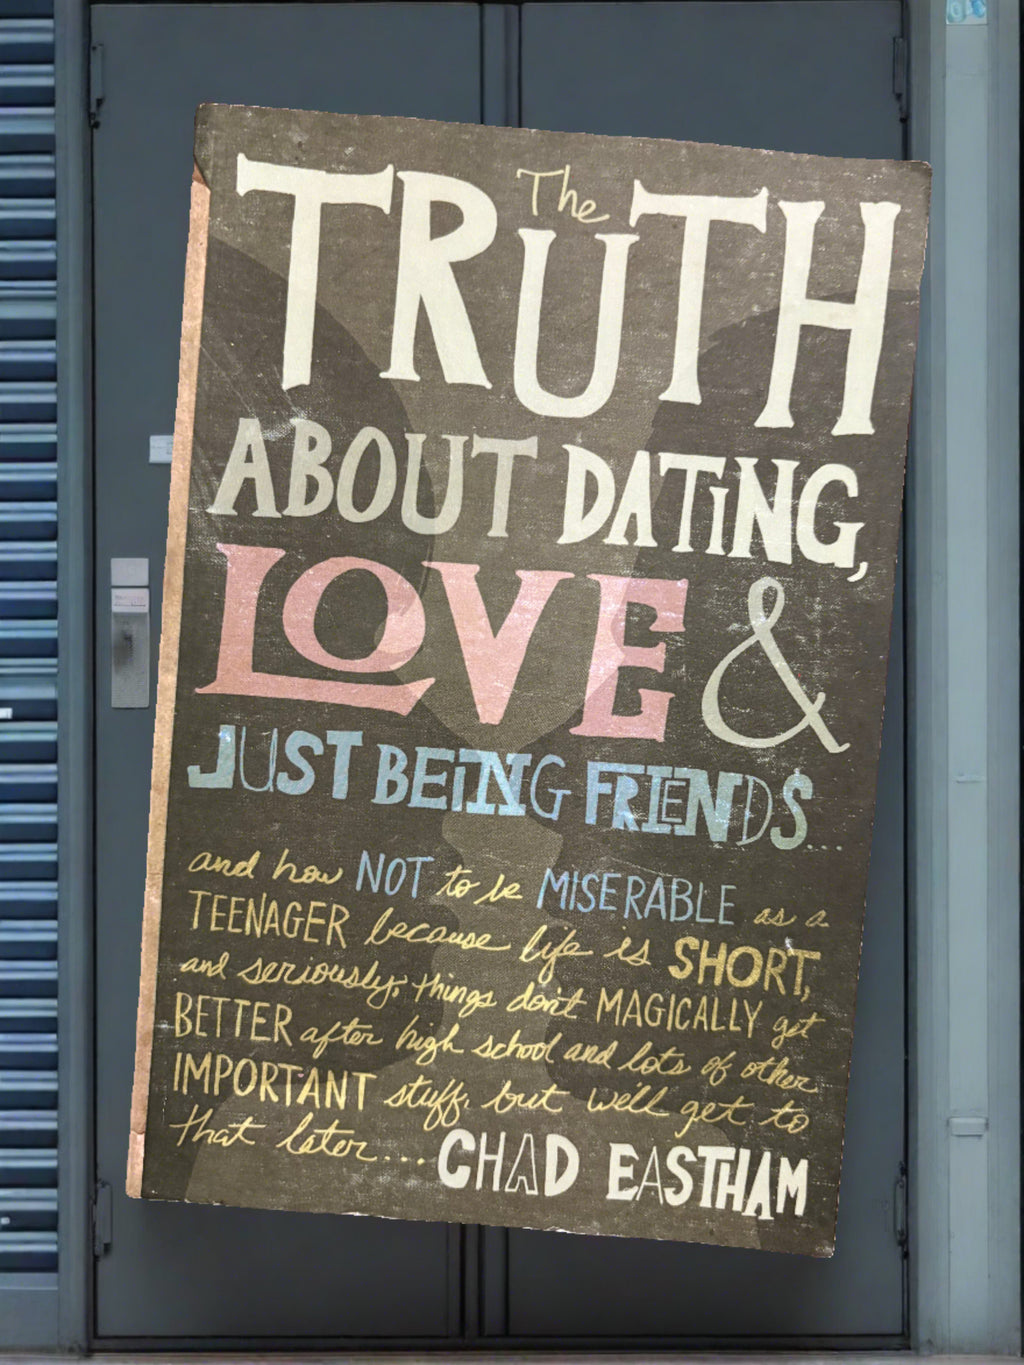 The Truth About Dating, Love & Just Being Friends...- By Chat Eastham